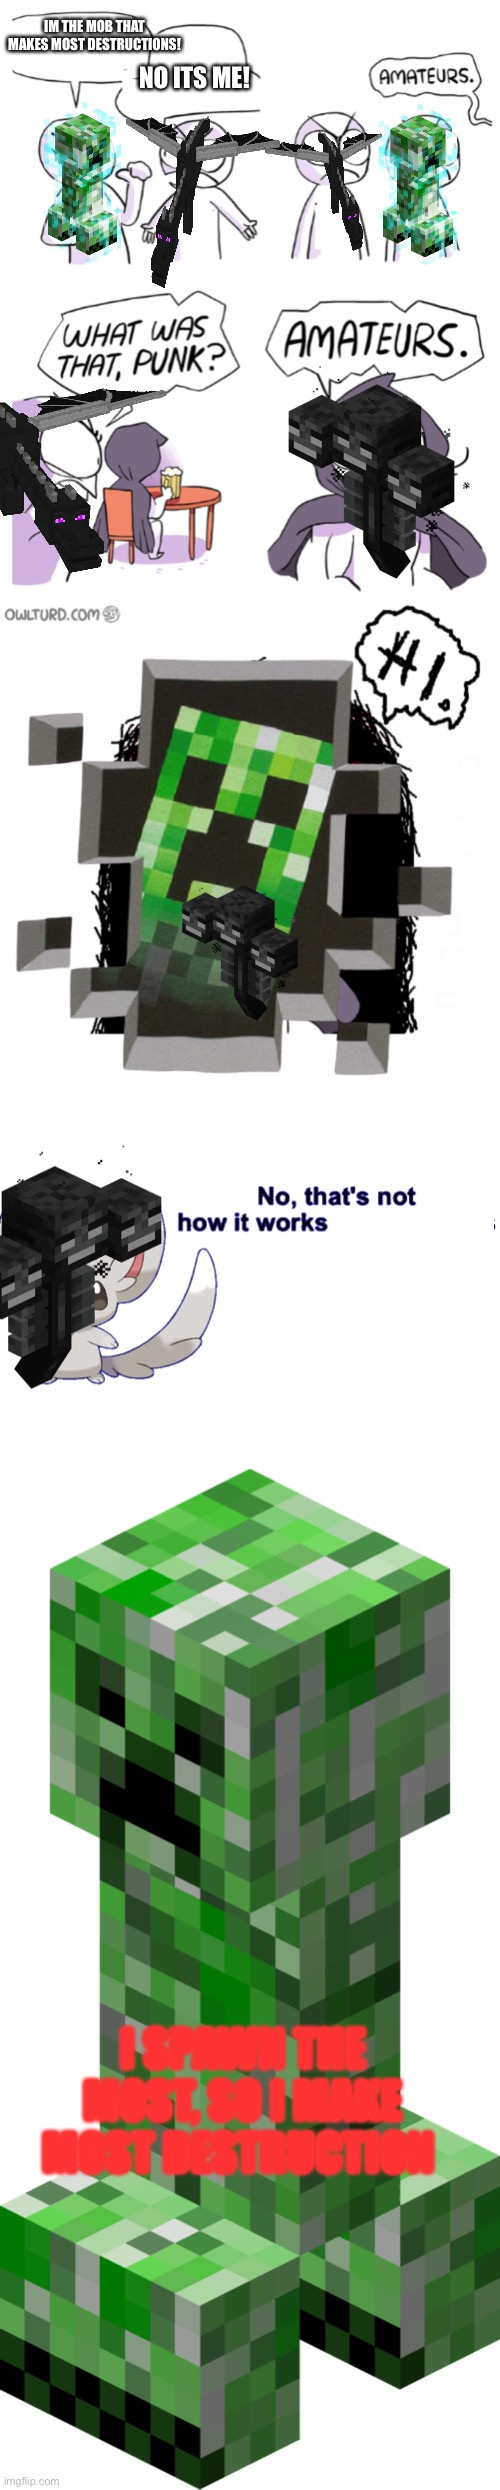 Mob Makes Most Destruction | IM THE MOB THAT MAKES MOST DESTRUCTIONS! NO ITS ME! I SPAWN THE MOST, SO I MAKE MOST DESTRUCTION | image tagged in amateurs extended,no that's not how it works you dumbass,minecraft creeper | made w/ Imgflip meme maker